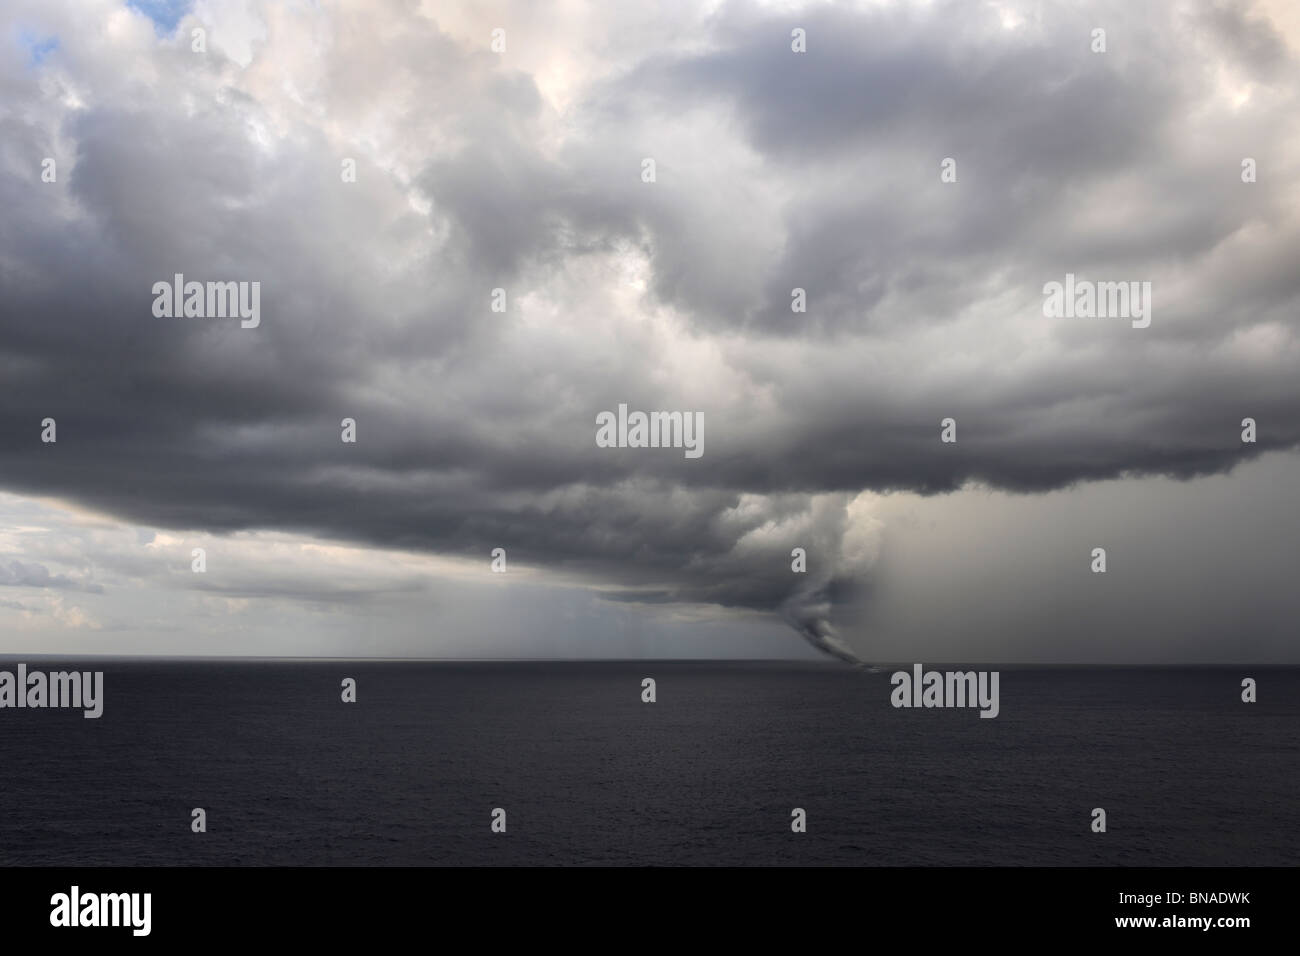 Tornado touching down at sea with dark clouds swirling Stock Photo